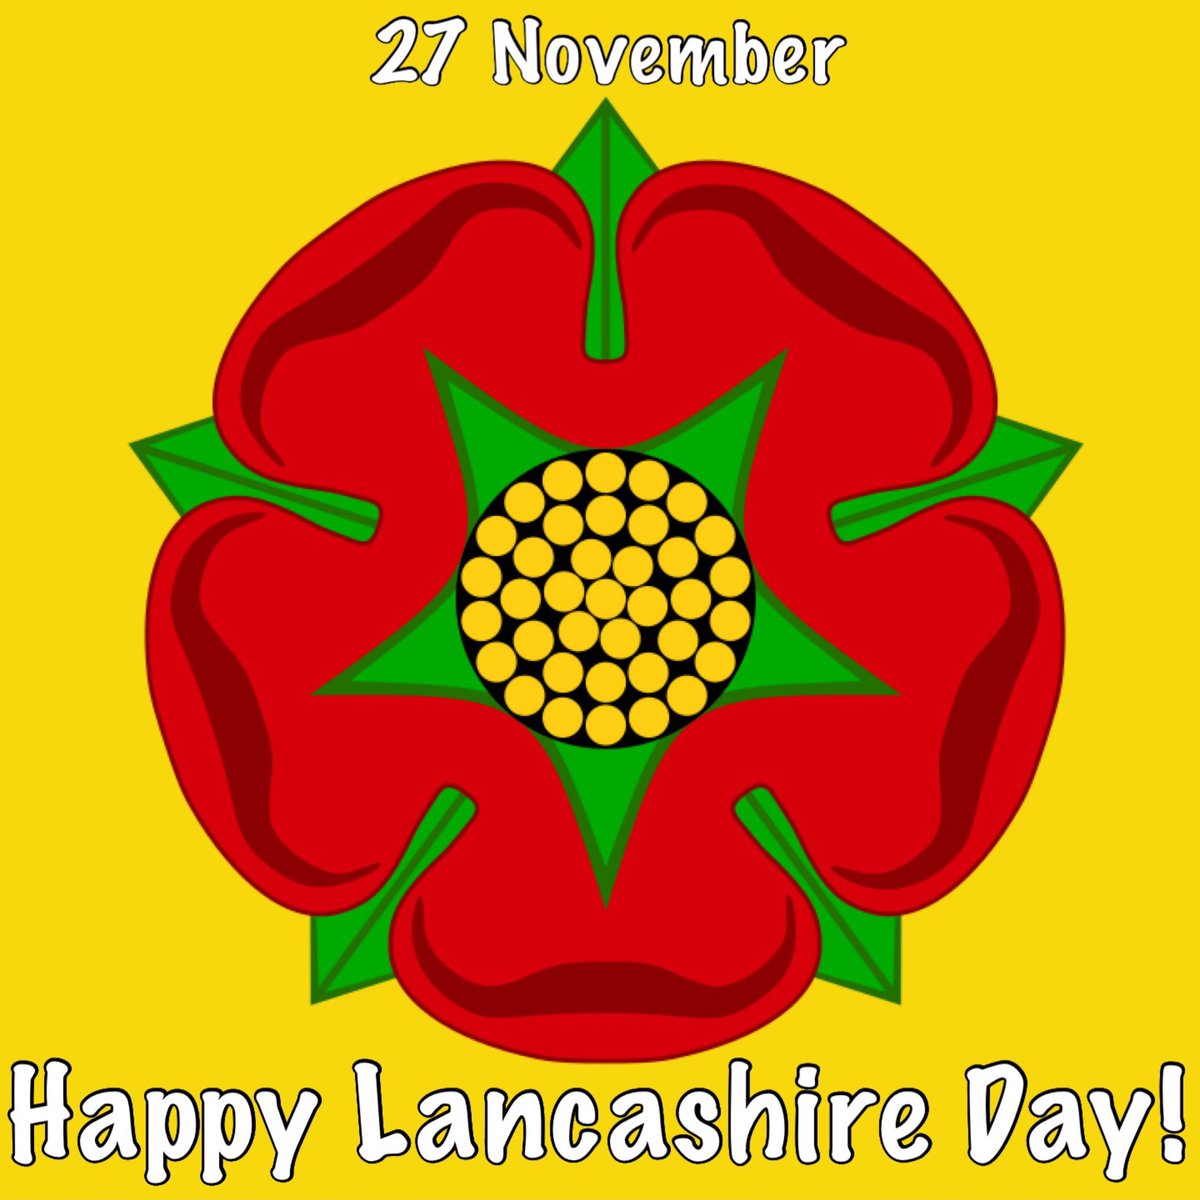 Today is #LancashireDay! Established in 1182 AD, the County Palatine of #Lancaster is a shire along the Irish Sea coast. #Lancashire stretches from the River Mersey in the South, to Morecambe Bay and the Furness Fells in the North. 🇬🇧 #HistoricCounties | #CountyDays 🏴󠁧󠁢󠁥󠁮󠁧󠁿